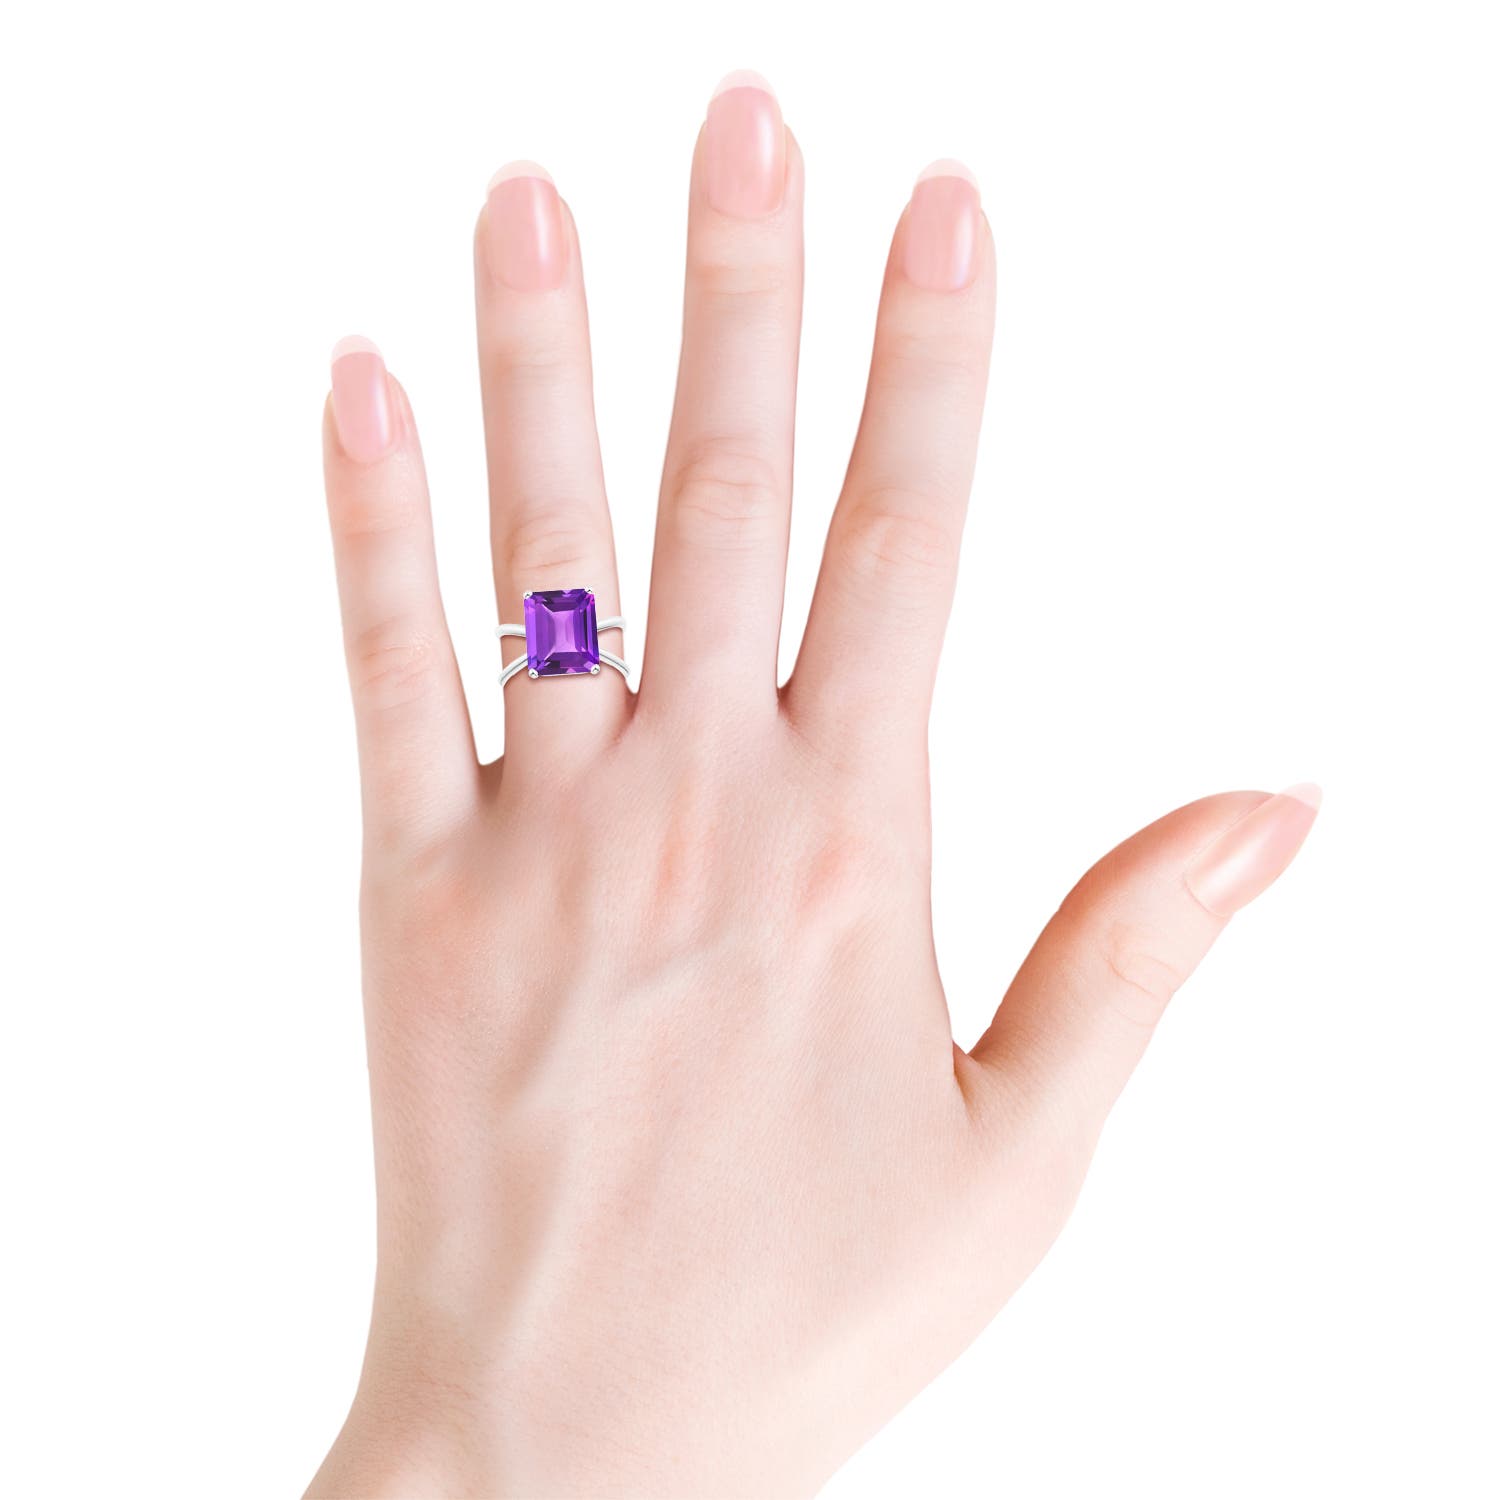 AAA - Amethyst / 5.3 CT / 14 KT White Gold